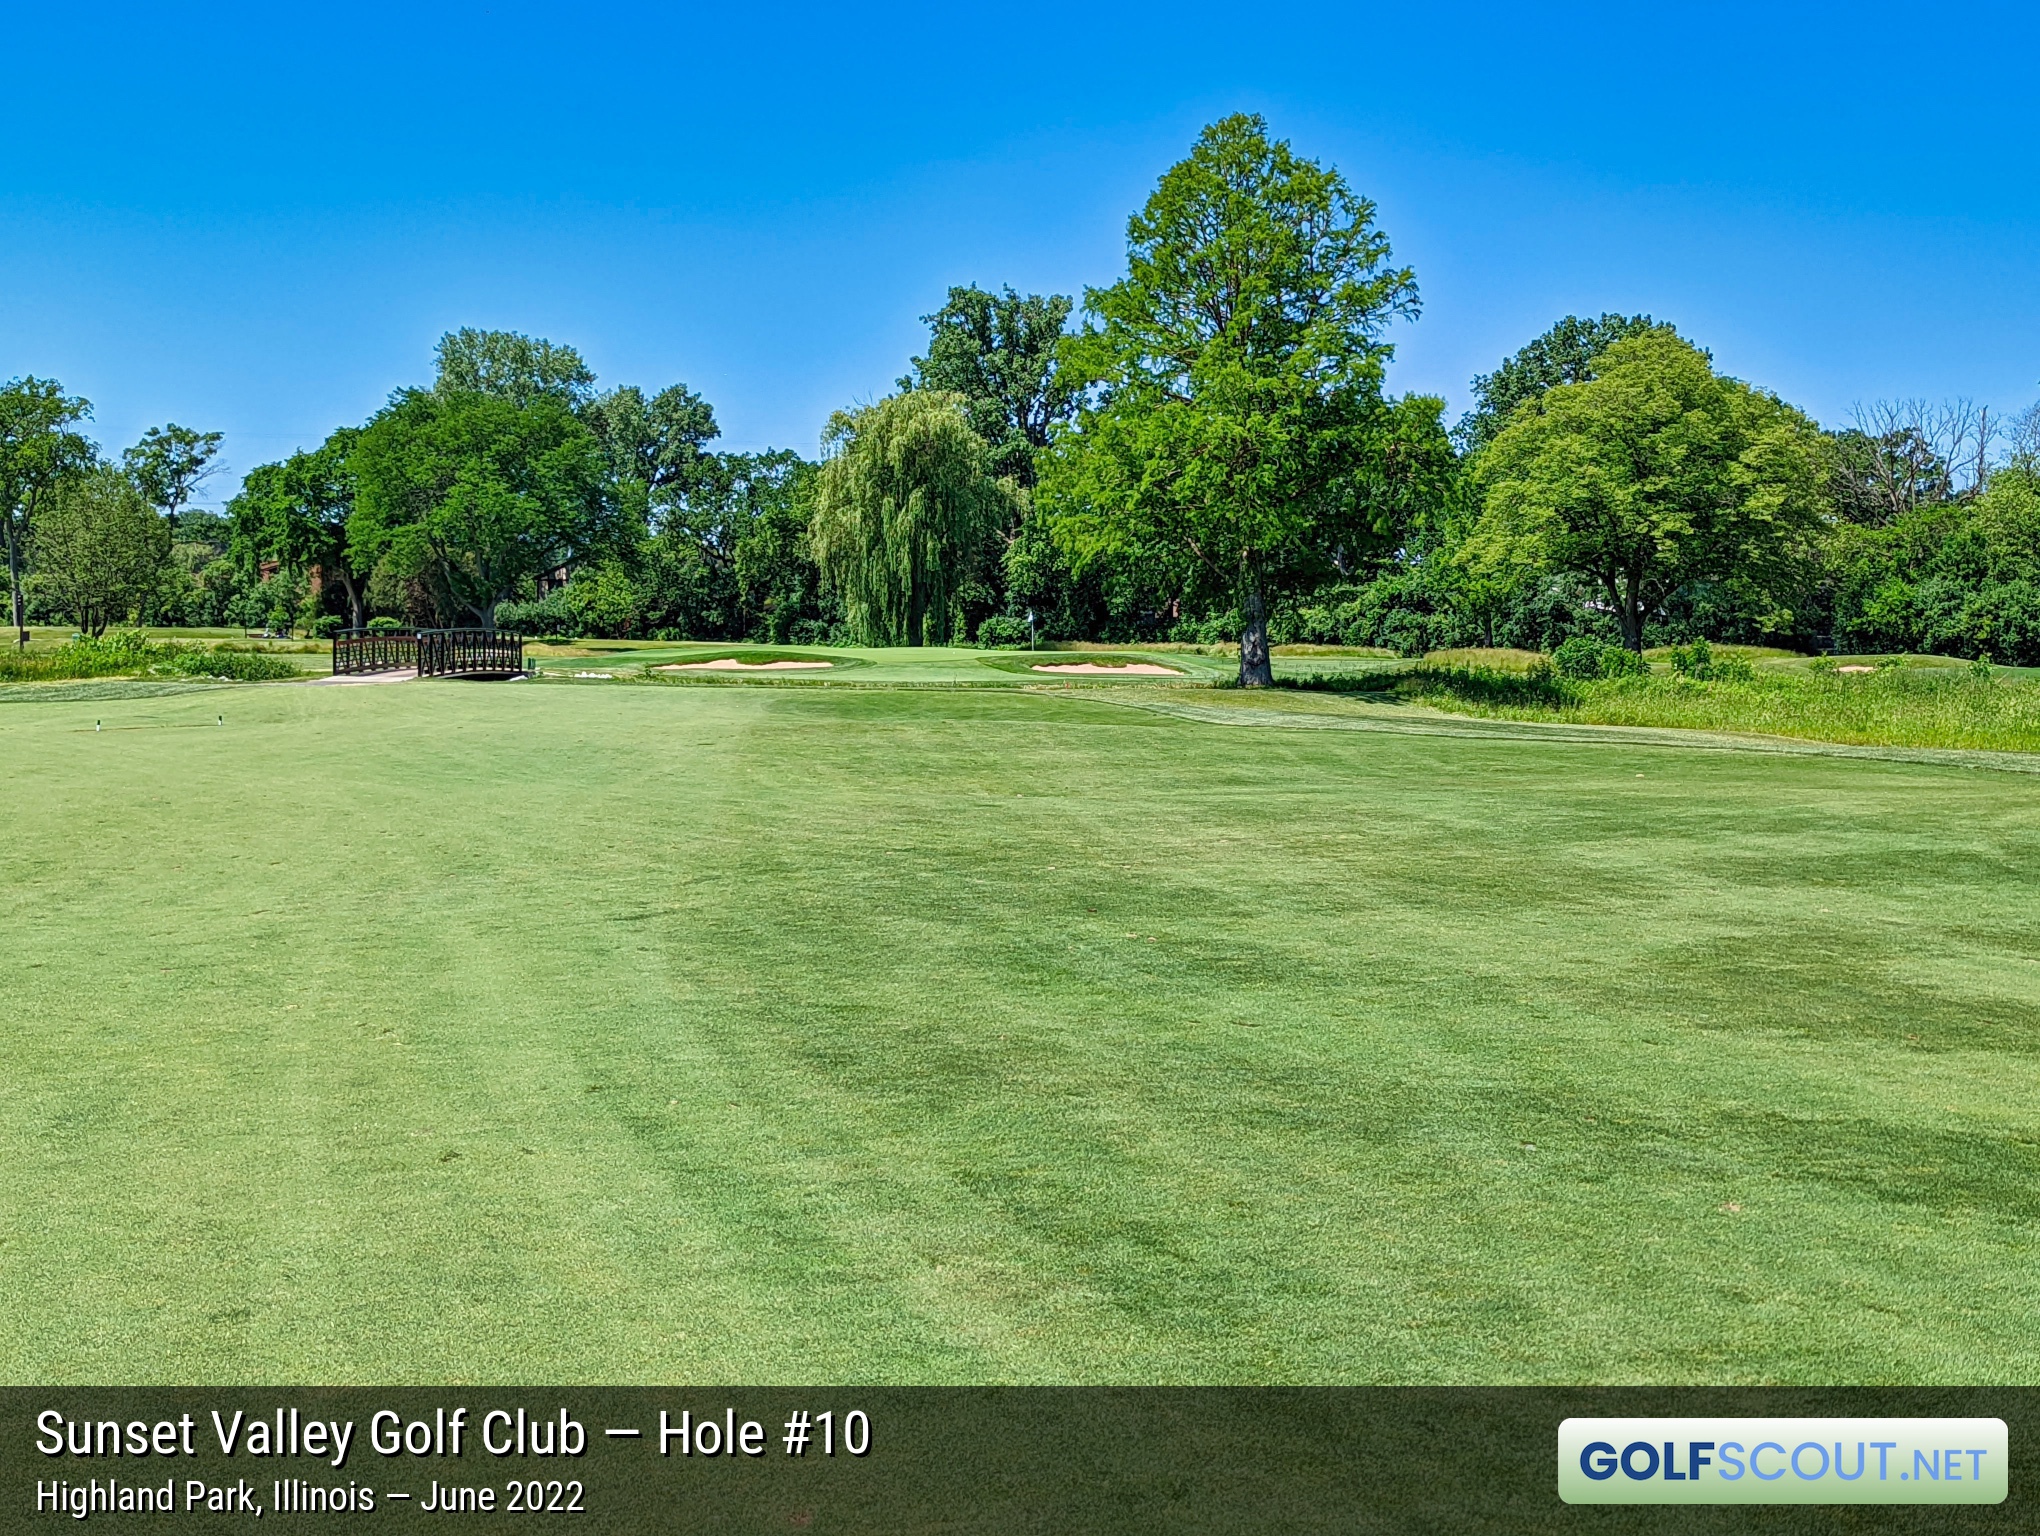 Photo of hole #10 at Sunset Valley Golf Club in Highland Park, Illinois. 